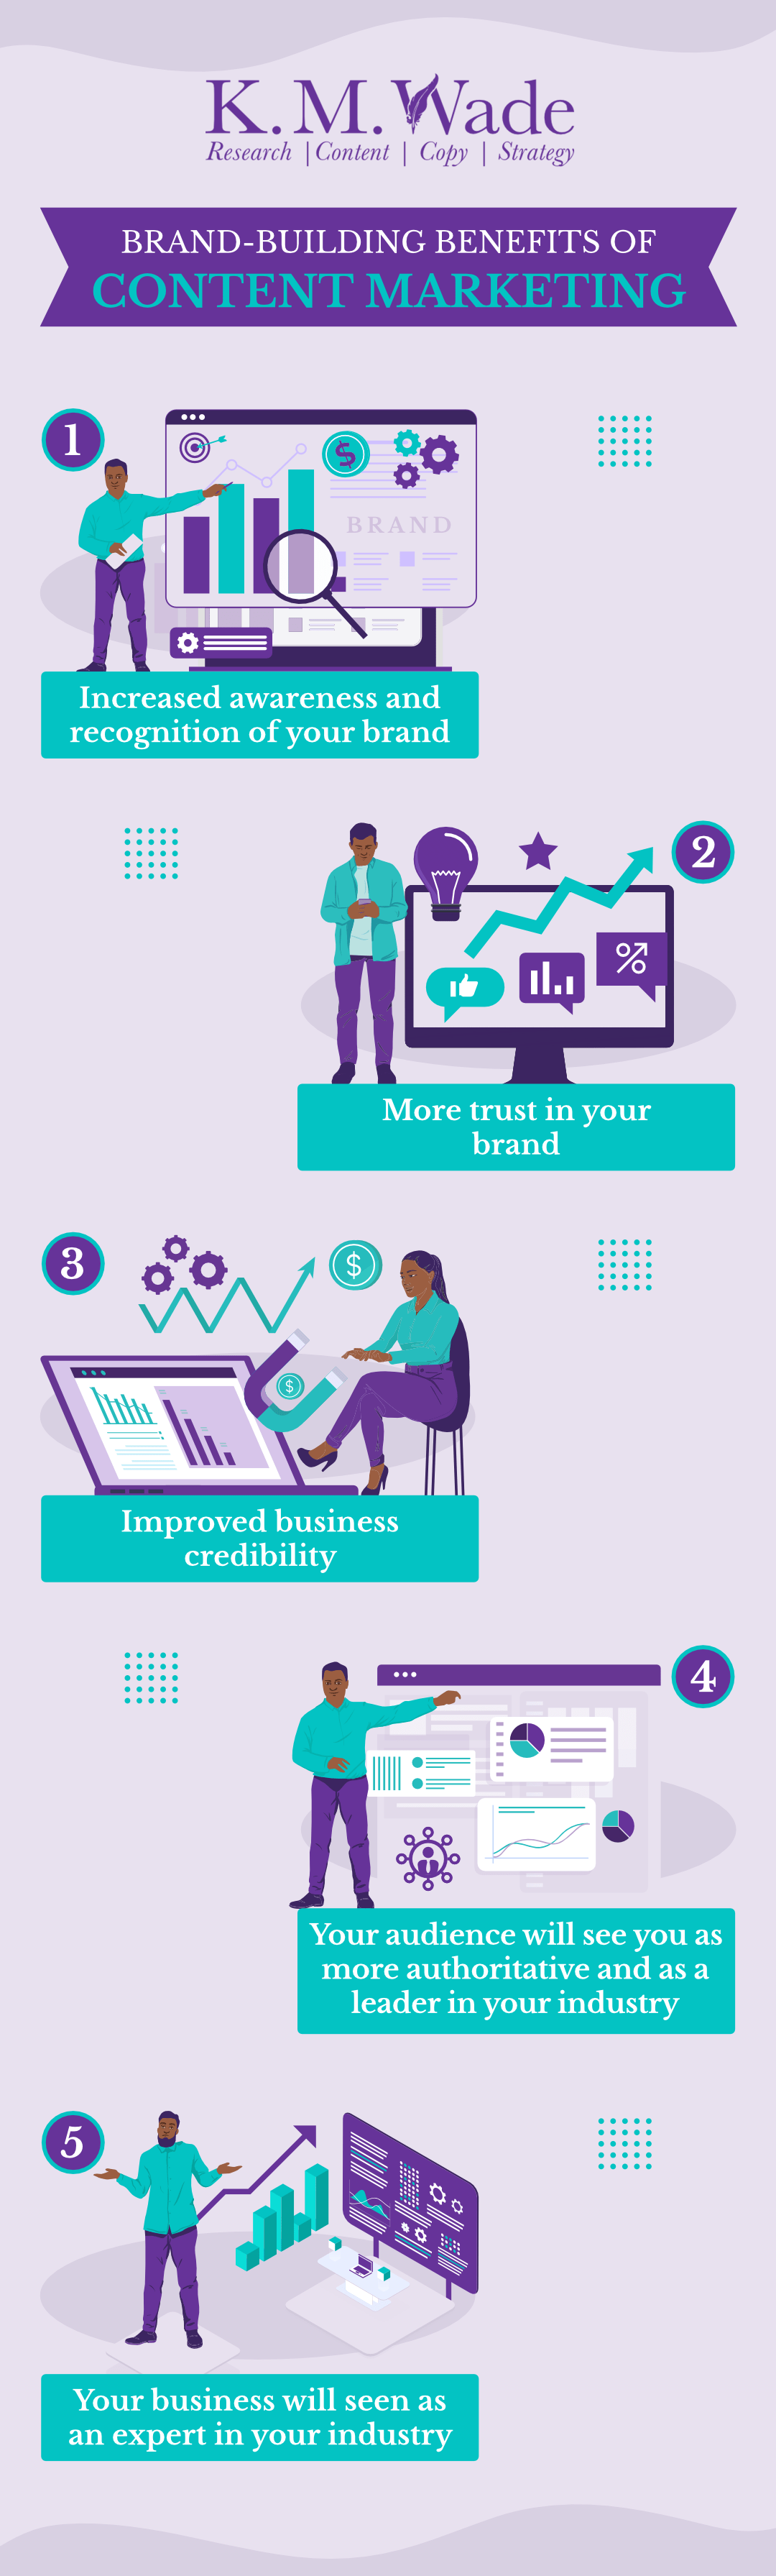 Infographic of brand-building benefits of content marketing. The text reads 1. Increased awareness and recognition of your brand 2. More trust in your brand 3. Improved business credibility 4. Your audience will see you as more authoritative and as a leader in your industry 5. Your business will be seen as an expert in your industry